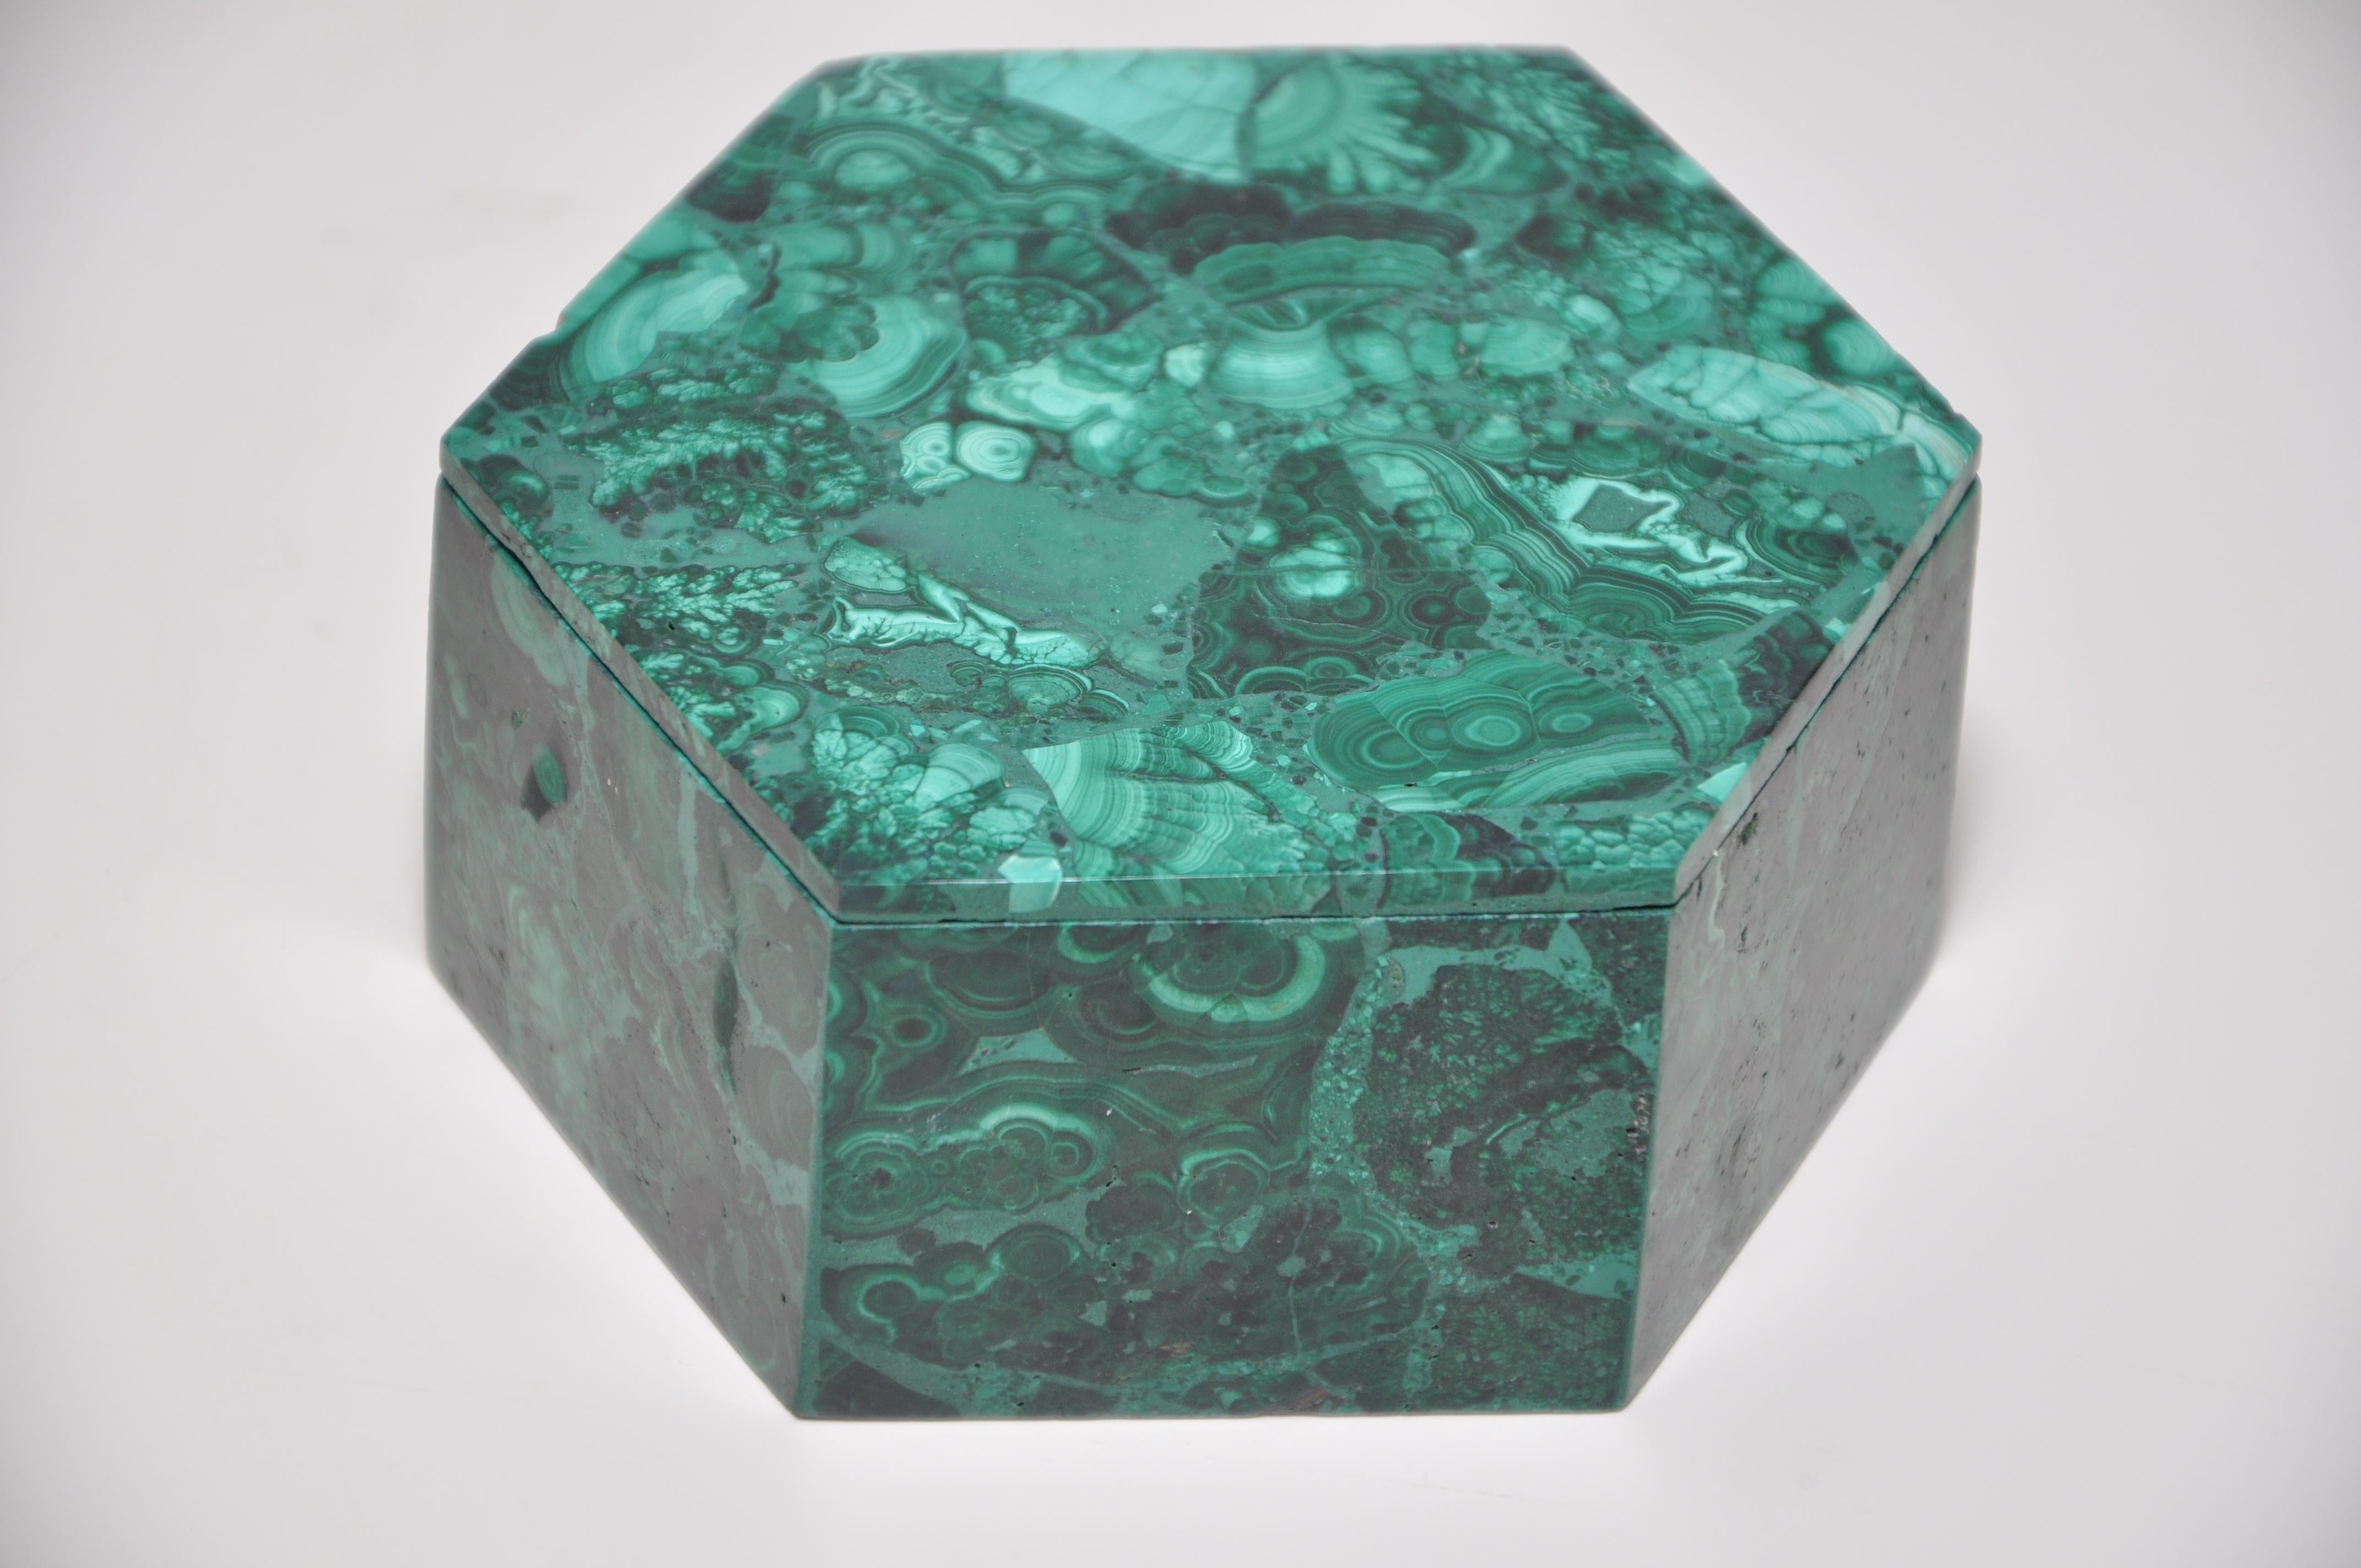 Vintage malachite natural gemstone green jewelry box

Vintage natural malachite gemstone jewelry box, hand carved by an artisan maker, in great condition. Opaque, green, patterned, mineral crystal. A copper based stone, which resonates strongly